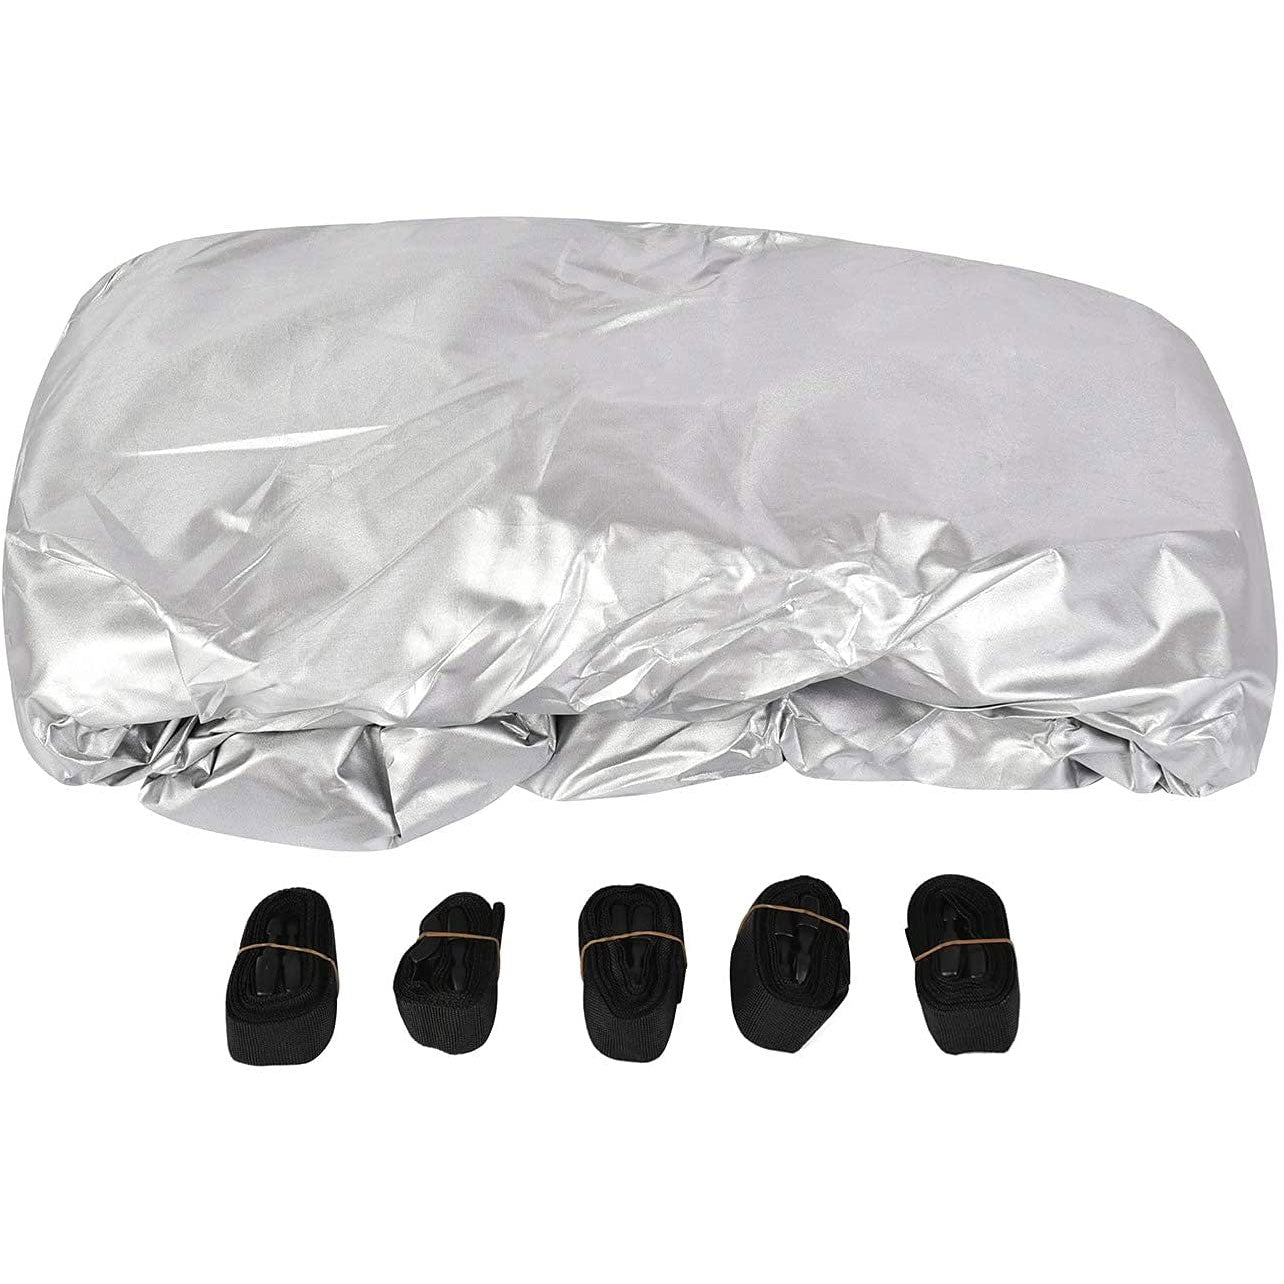 Trailerable Boat Covers Siver